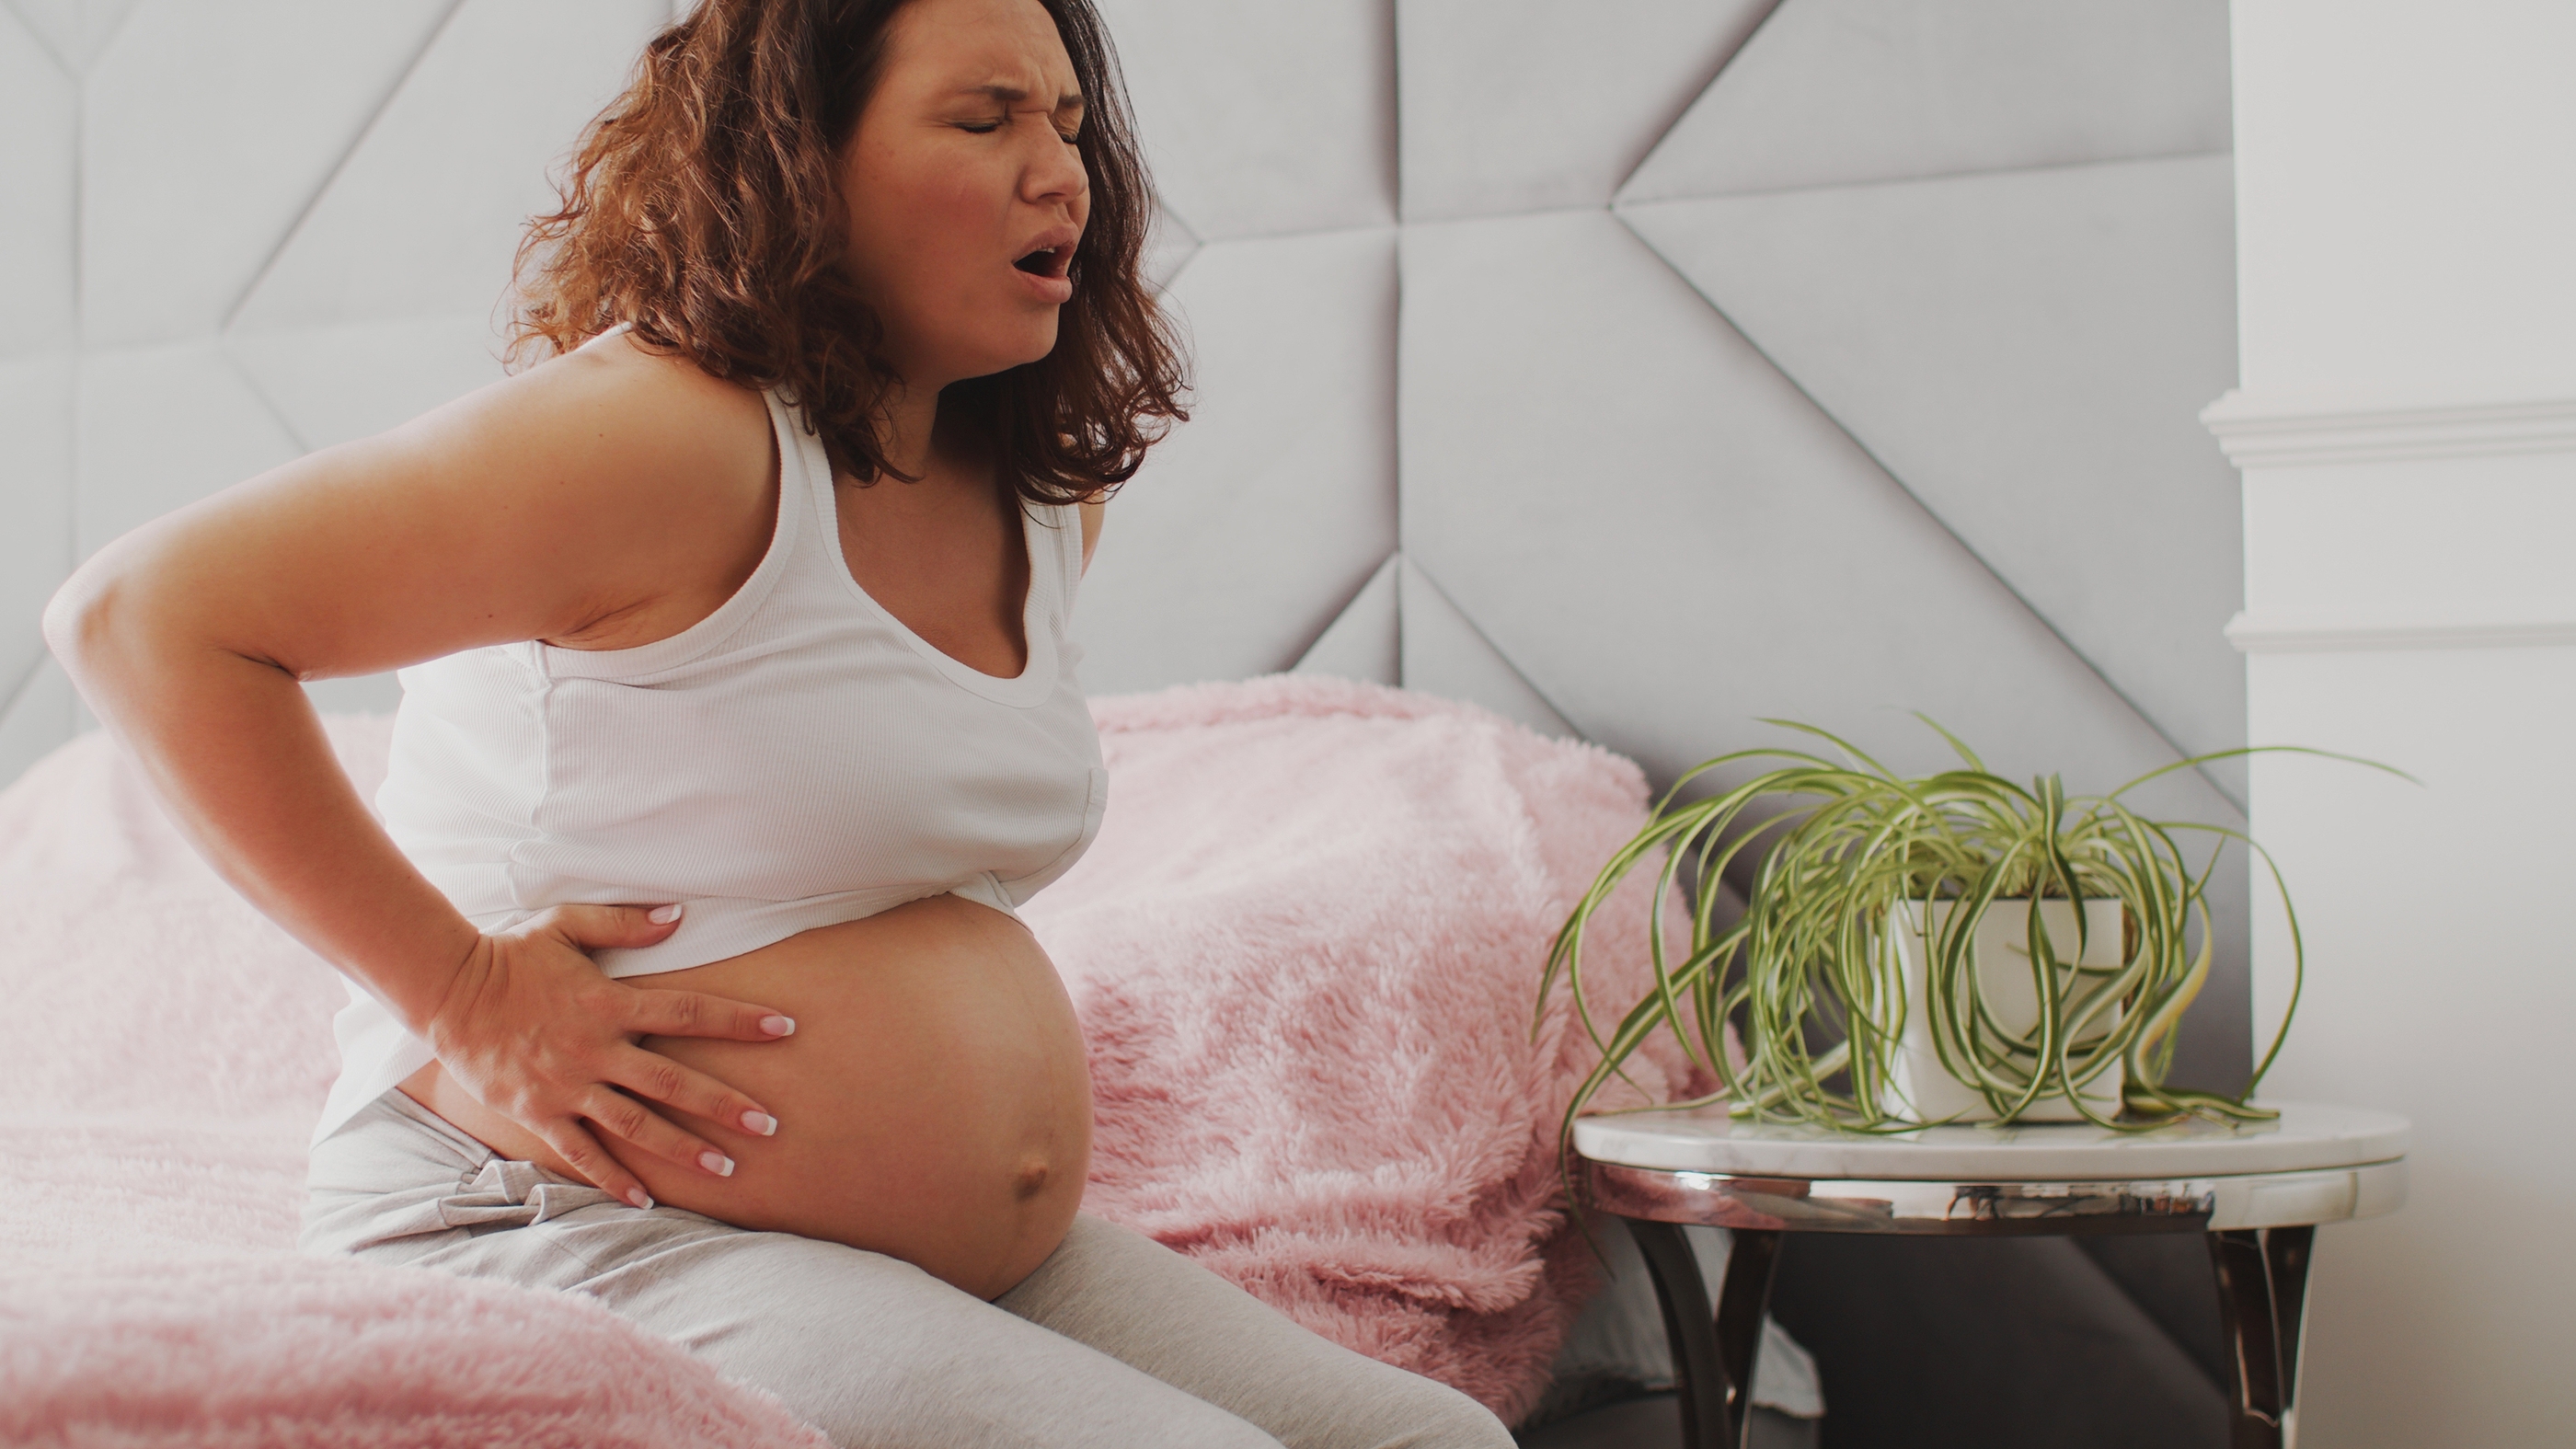 Bleeding During Pregnancy: Causes, Diagnosis And Treatment